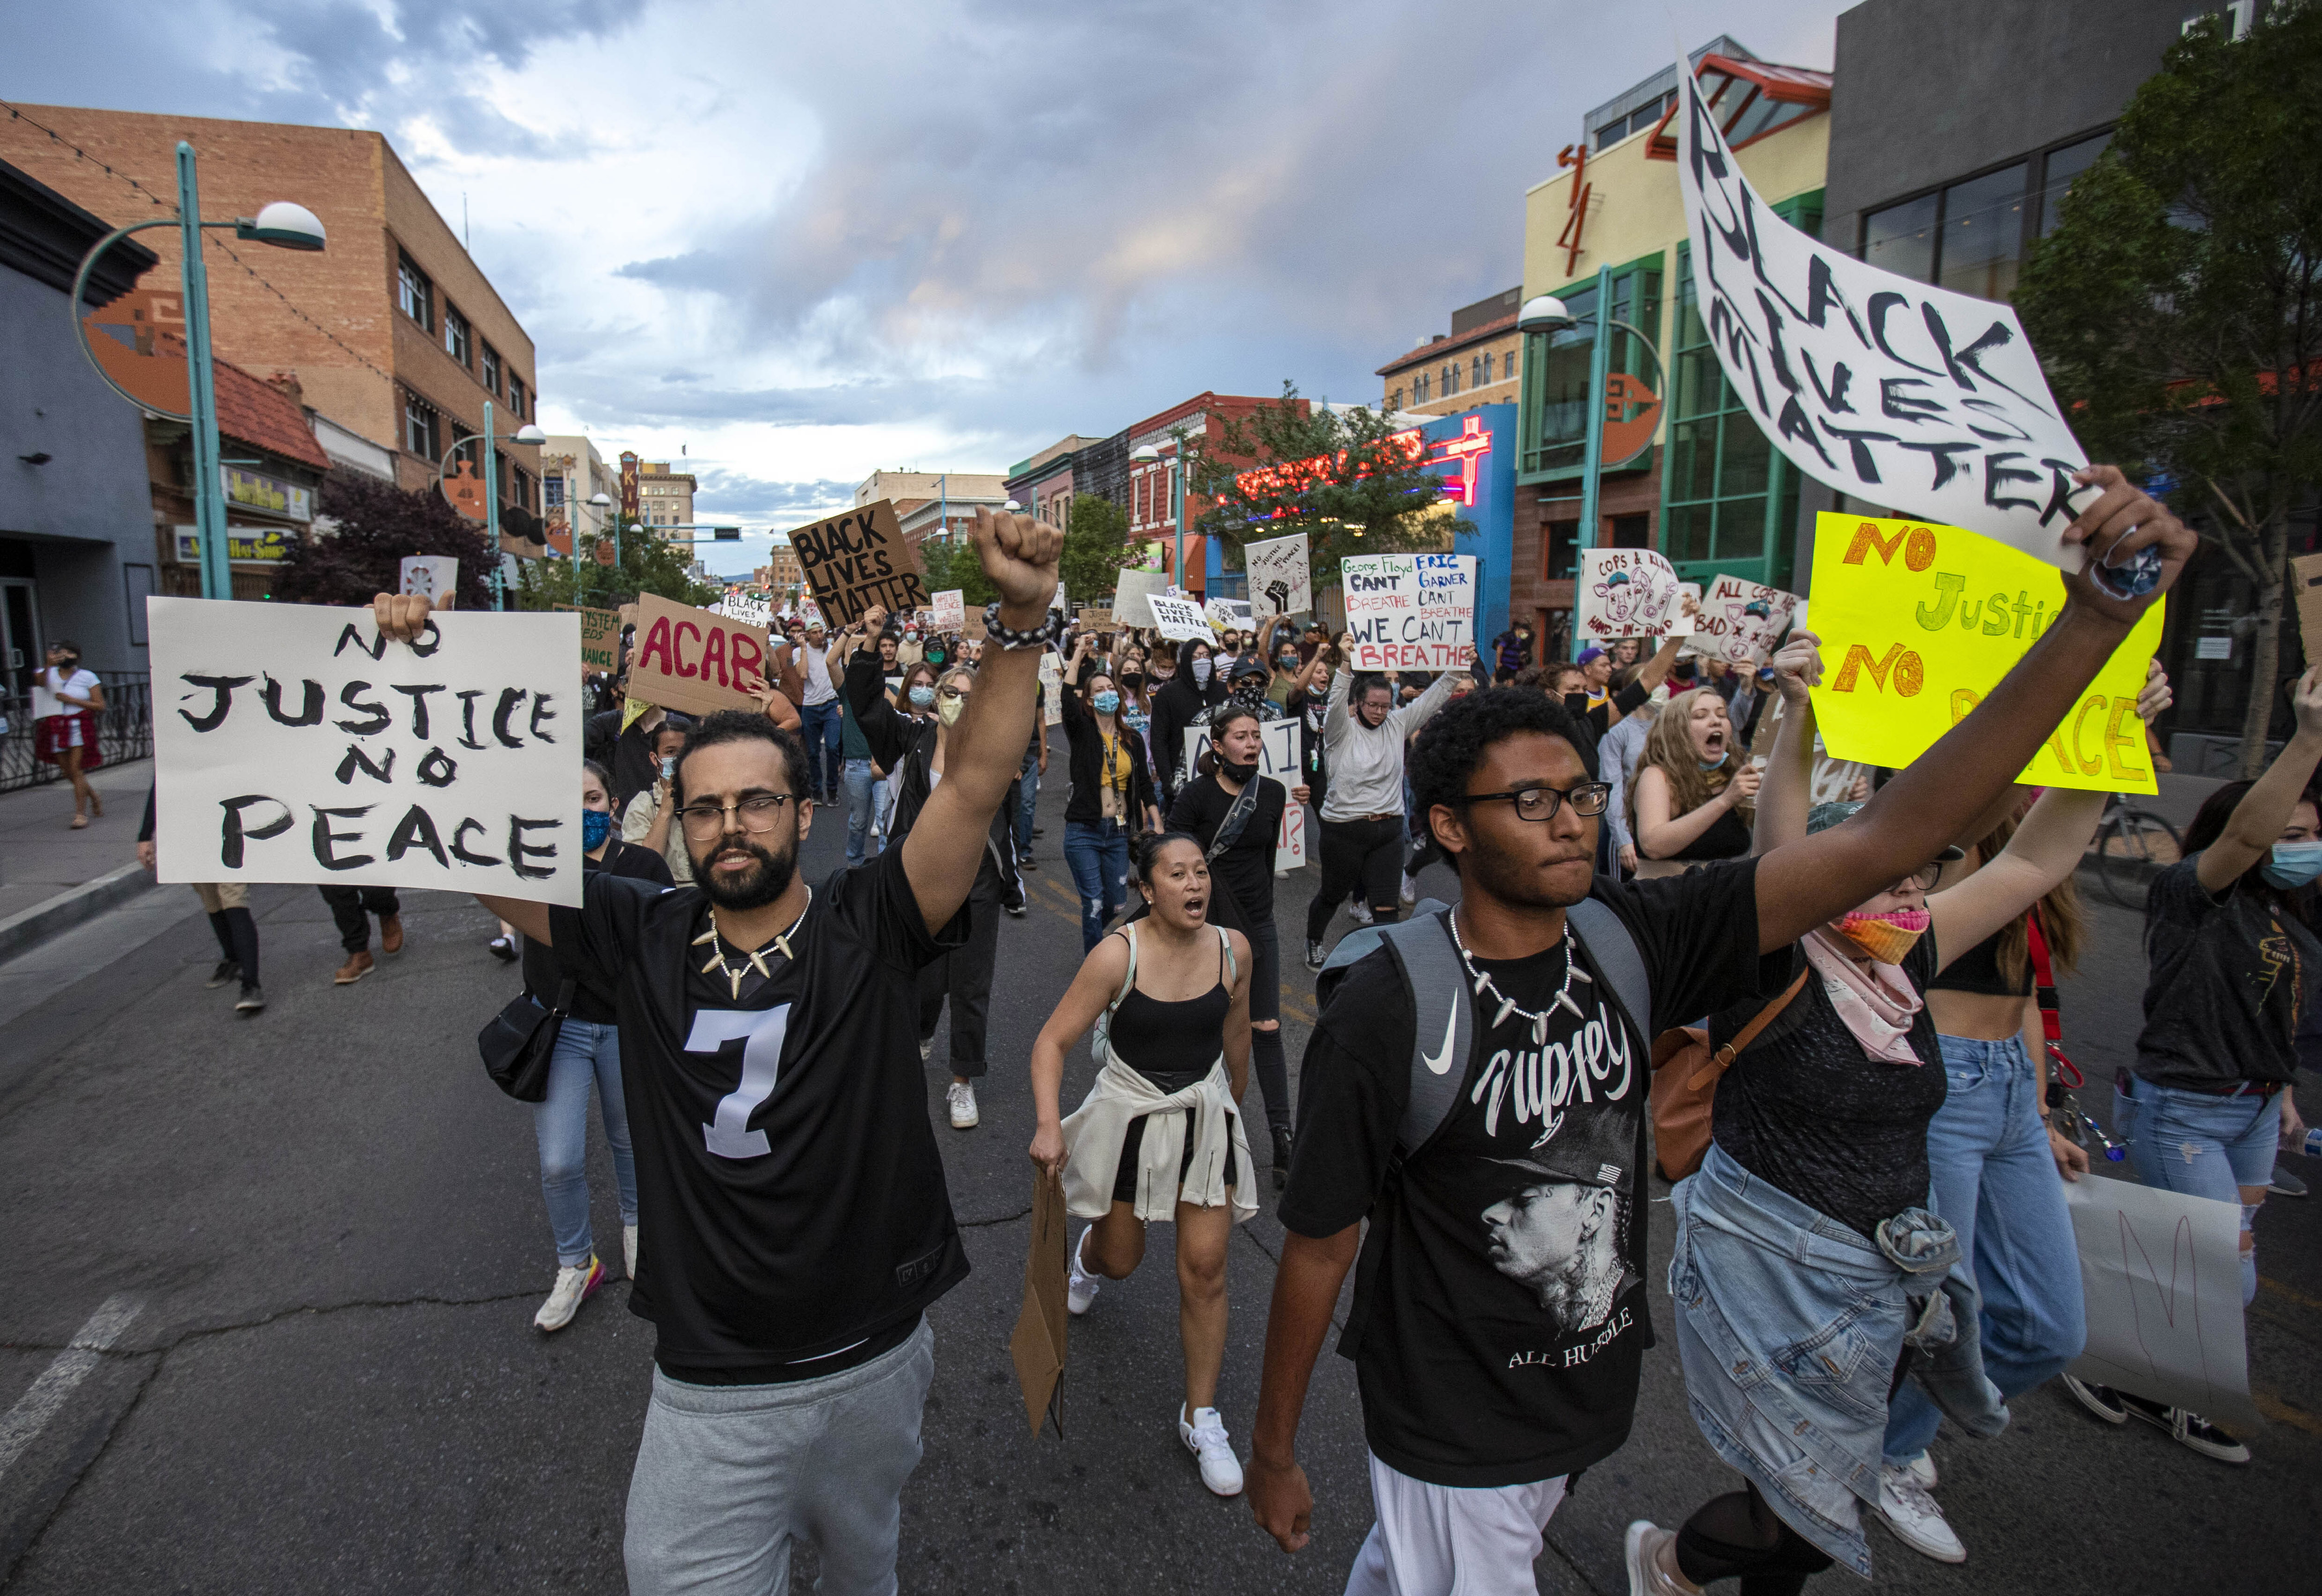 Demonstrators protest the death of George Floyd in downtown Albuquerque, N.M., Sunday, May 31, 2020. Floyd was a black man who died in police custody in Minneapolis on May 25. (AP Photo/Andres Leighton)